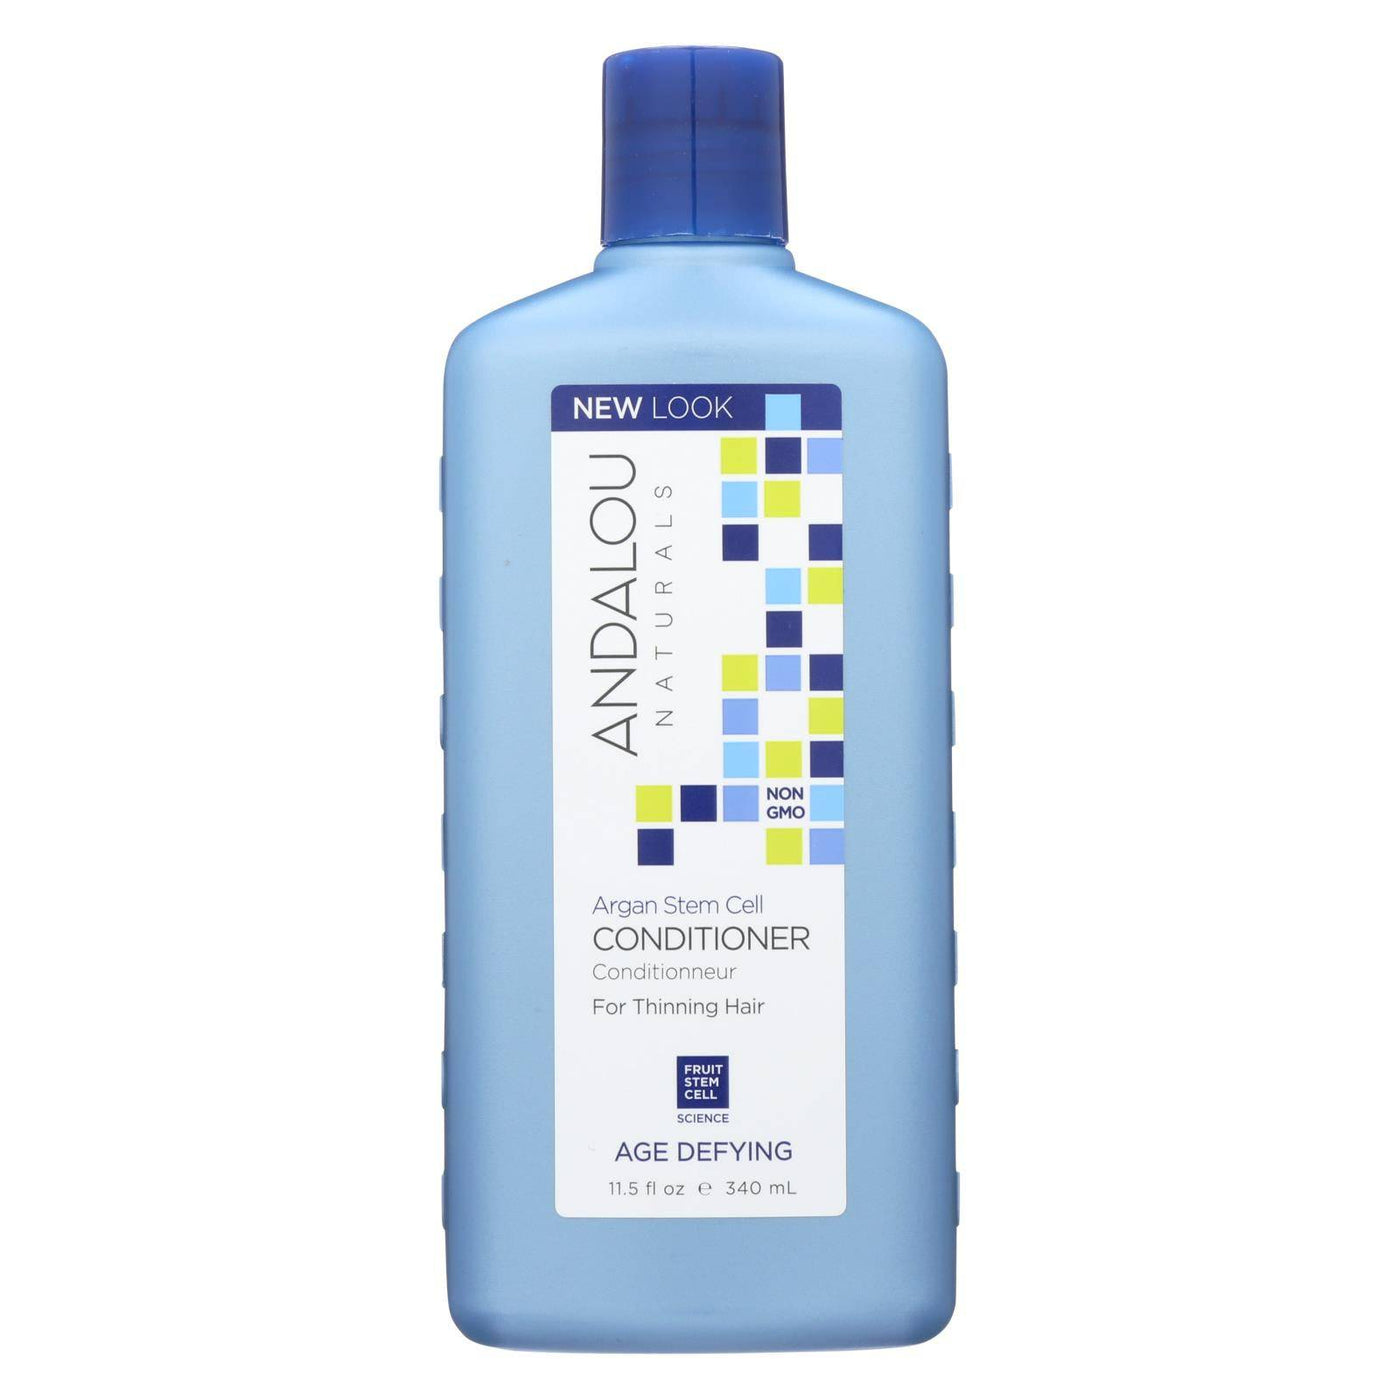 Andalou Naturals Age Defying Conditioner With Argan Stem Cells - 11.5 Fl Oz | OnlyNaturals.us